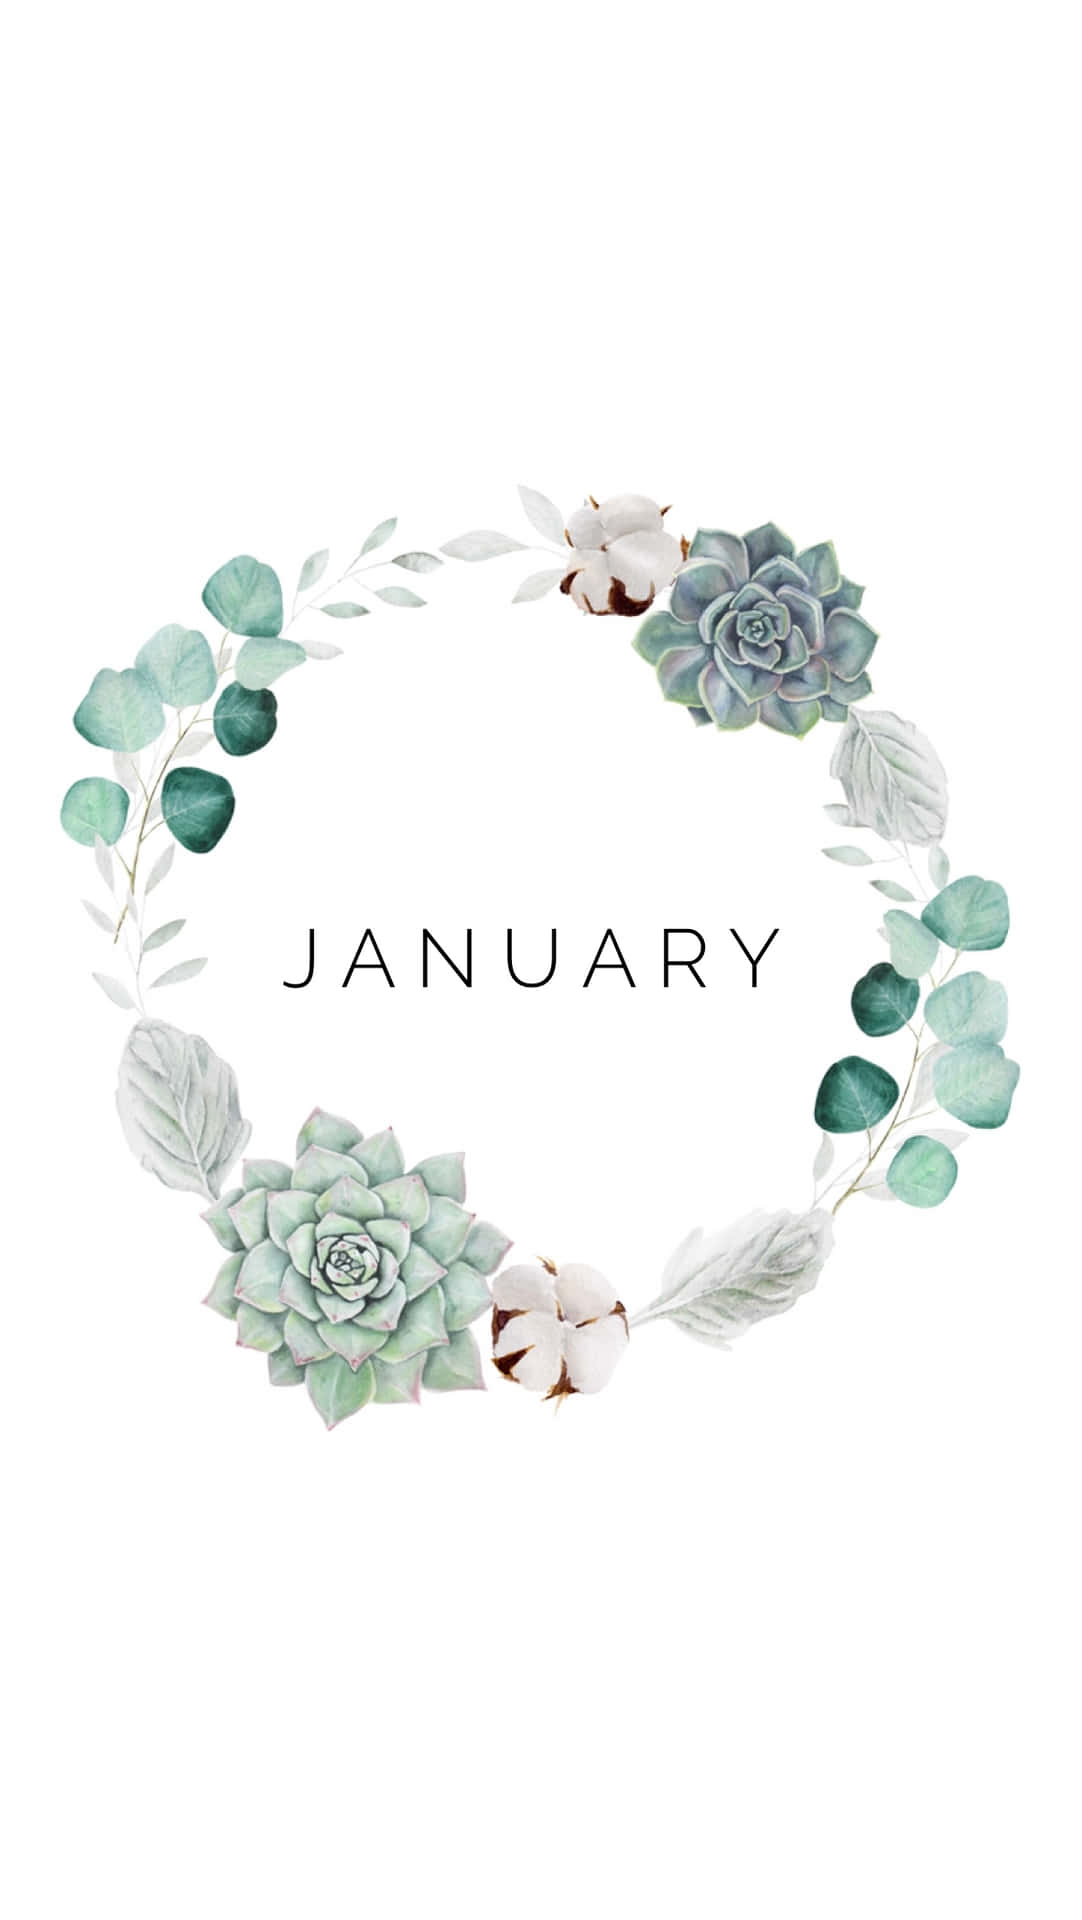 Enjoy the sweet and cozy moments of January Wallpaper